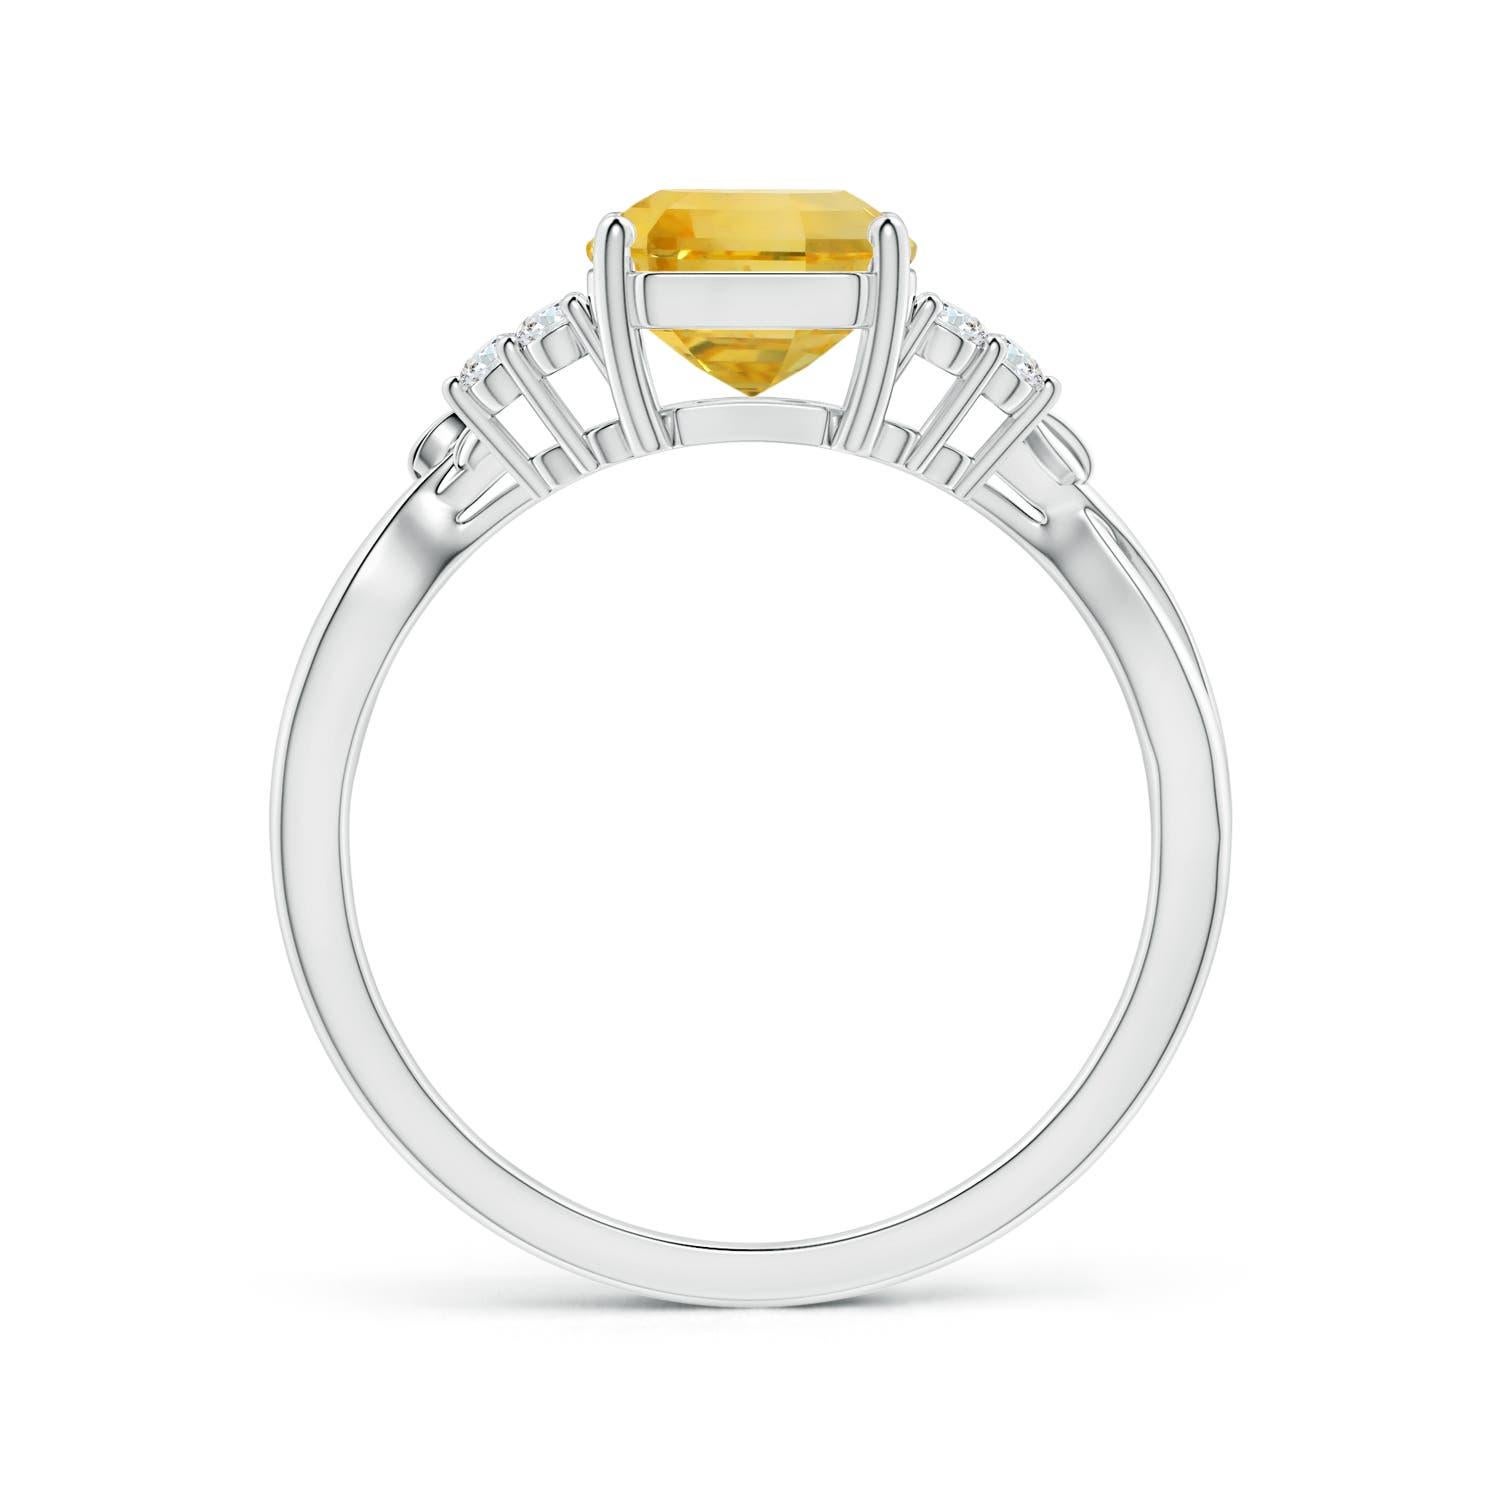 For Sale:  ANGARA GIA Certified Emerald-Cut Yellow Sapphire & Diamond Ring in White Gold  2